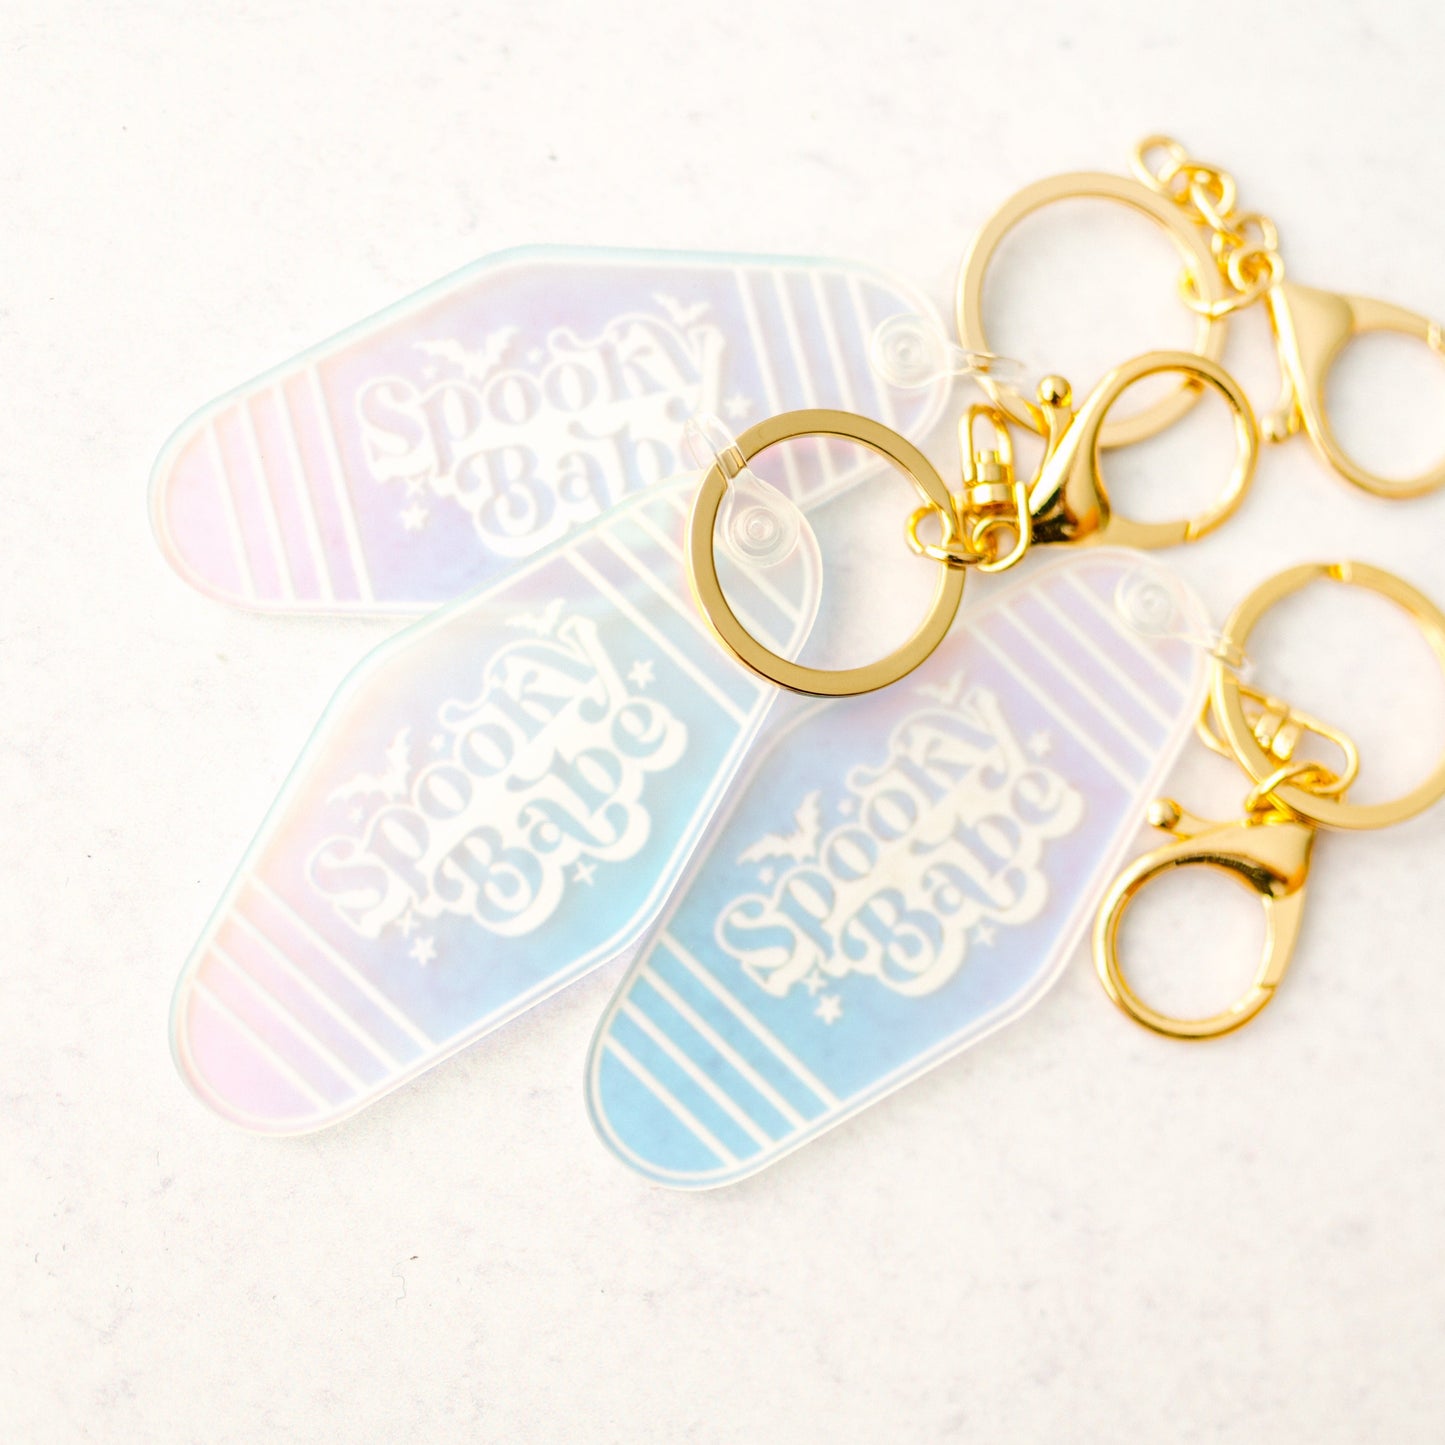 SALE - Iridescent Spooky Babe Vintage Hotel Style Keychain